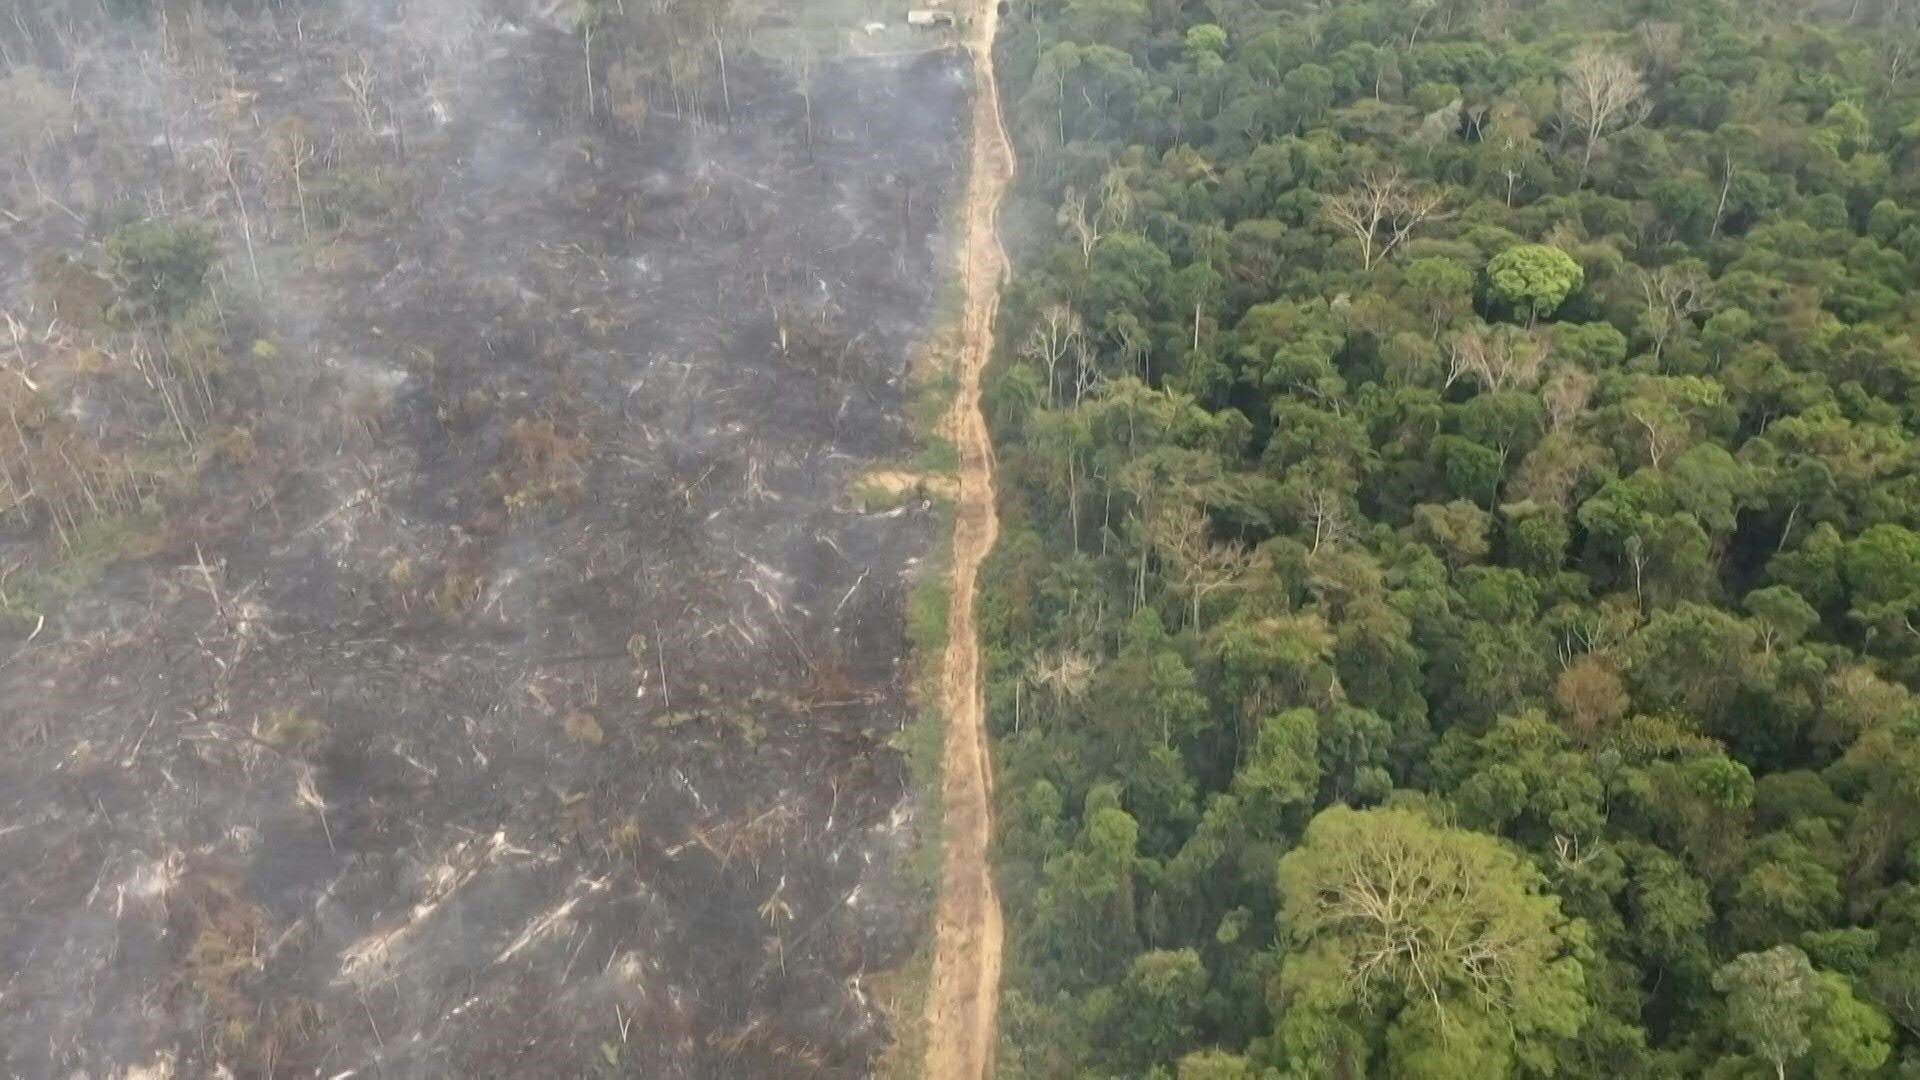 Deforestation in the Brazilian Amazon reached a new record for the month of April, with more than 1,000 square kilometers, the equivalent of 140,000 football fields, cut down, according to satellite data released Friday.